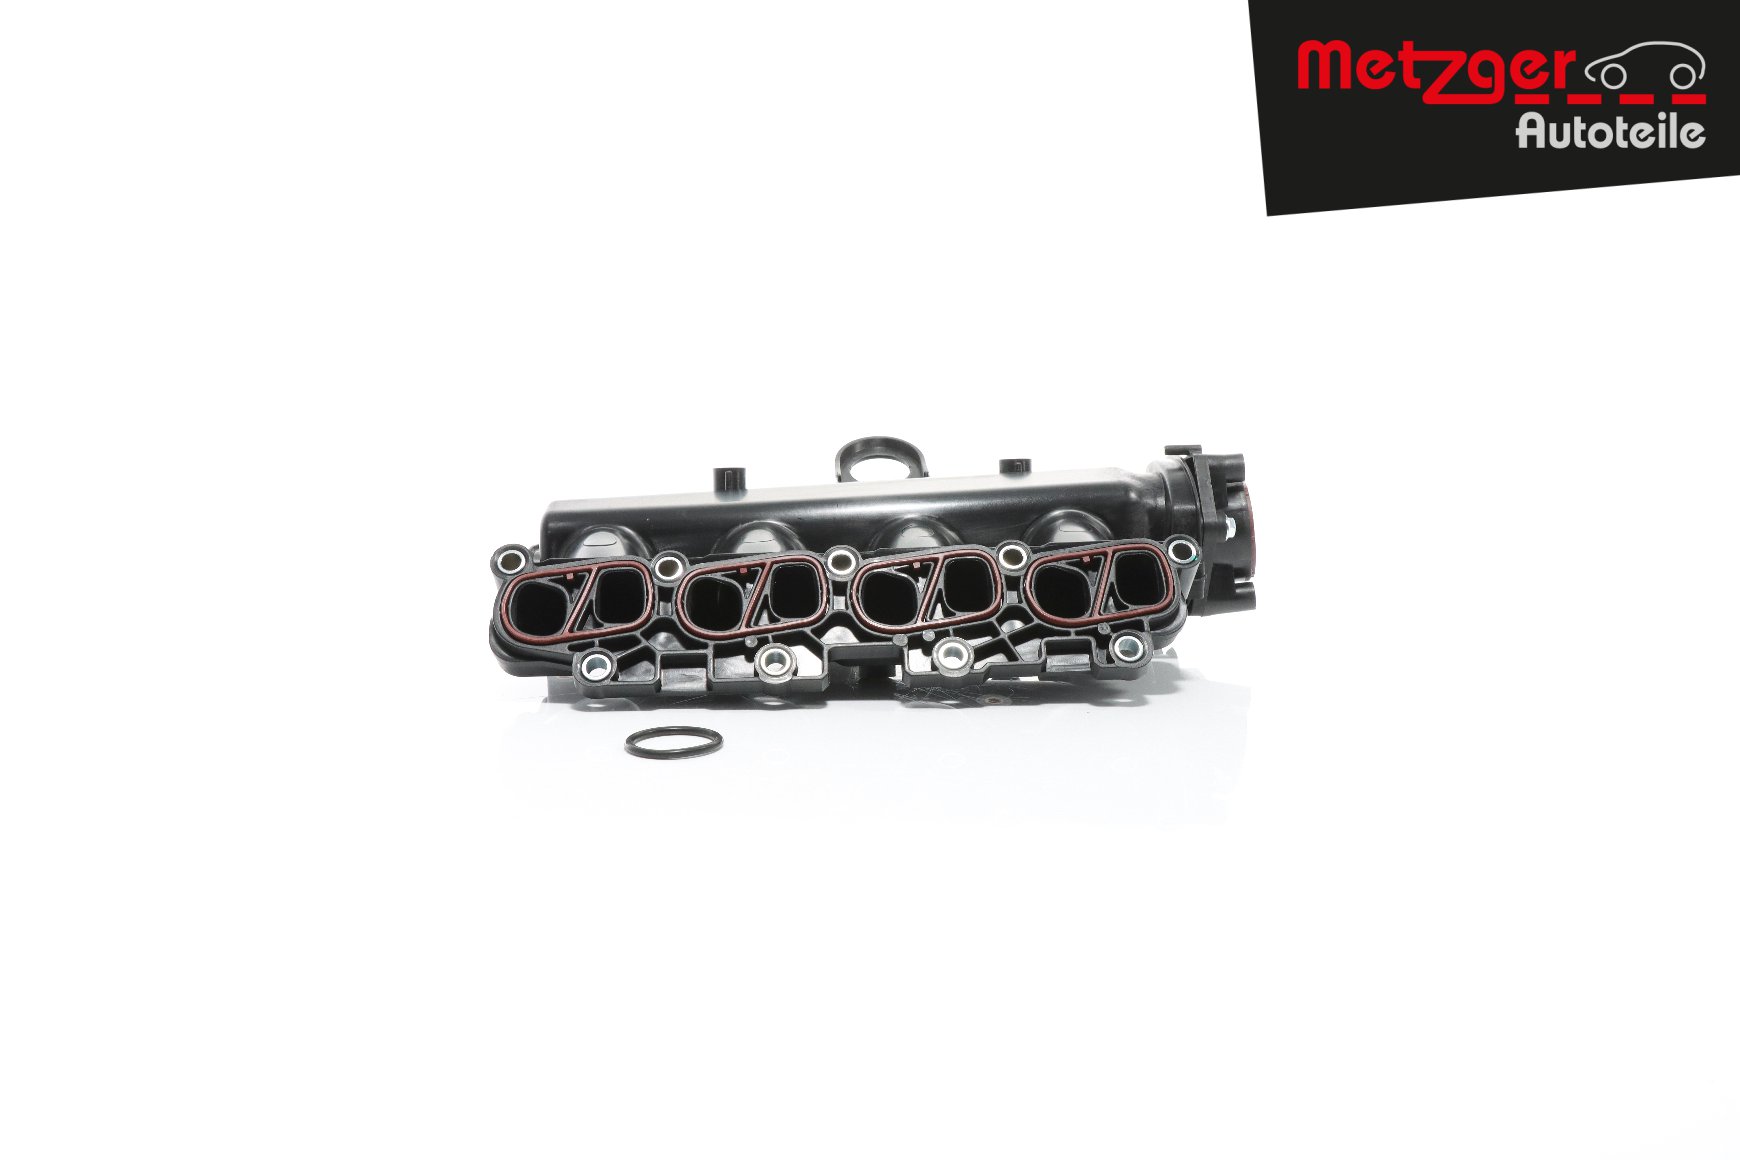 Chevrolet Inlet manifold METZGER 2100067 at a good price